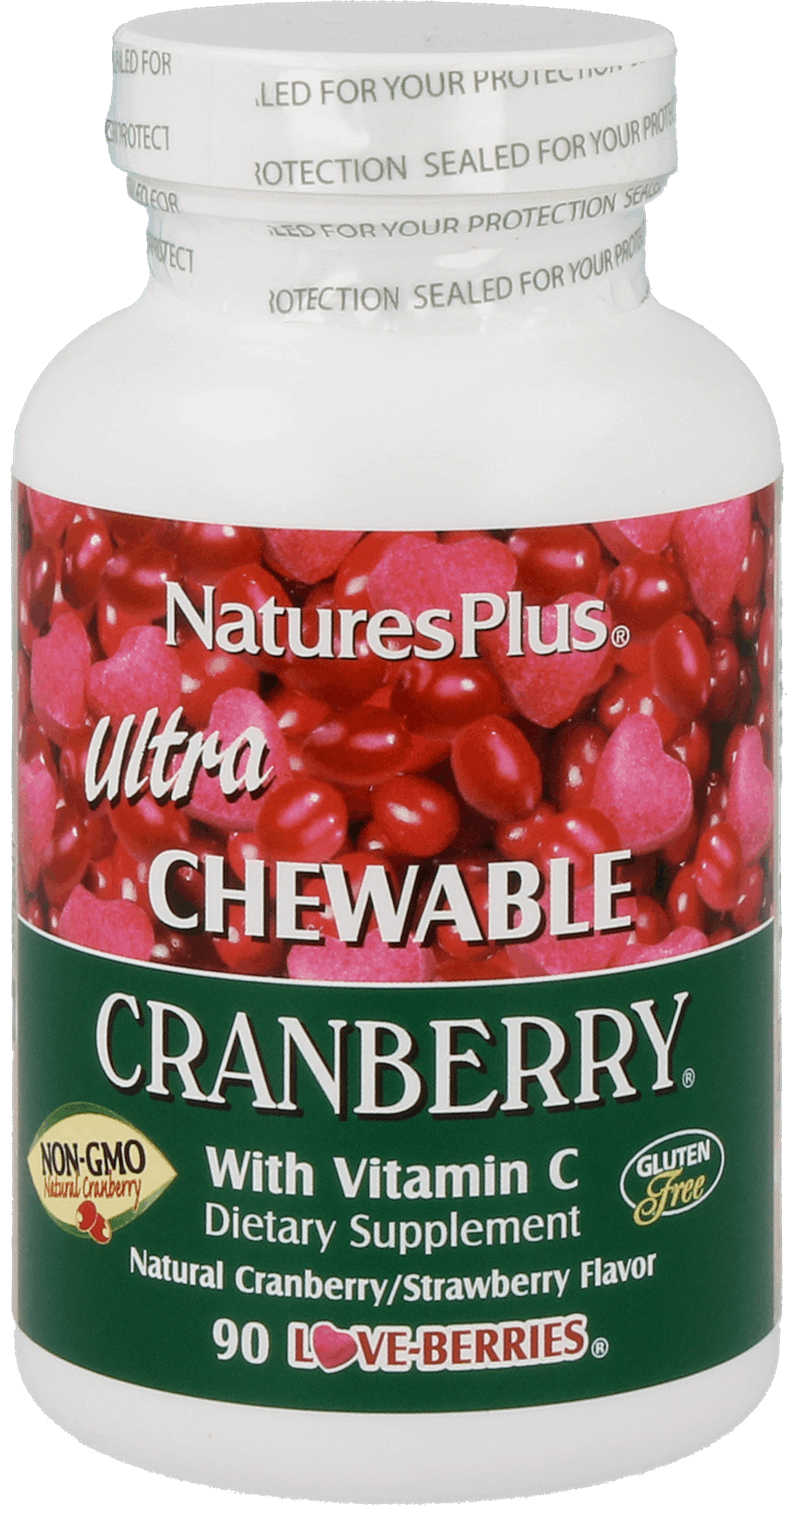 Ultra Chewable Cranberry 200 mg 